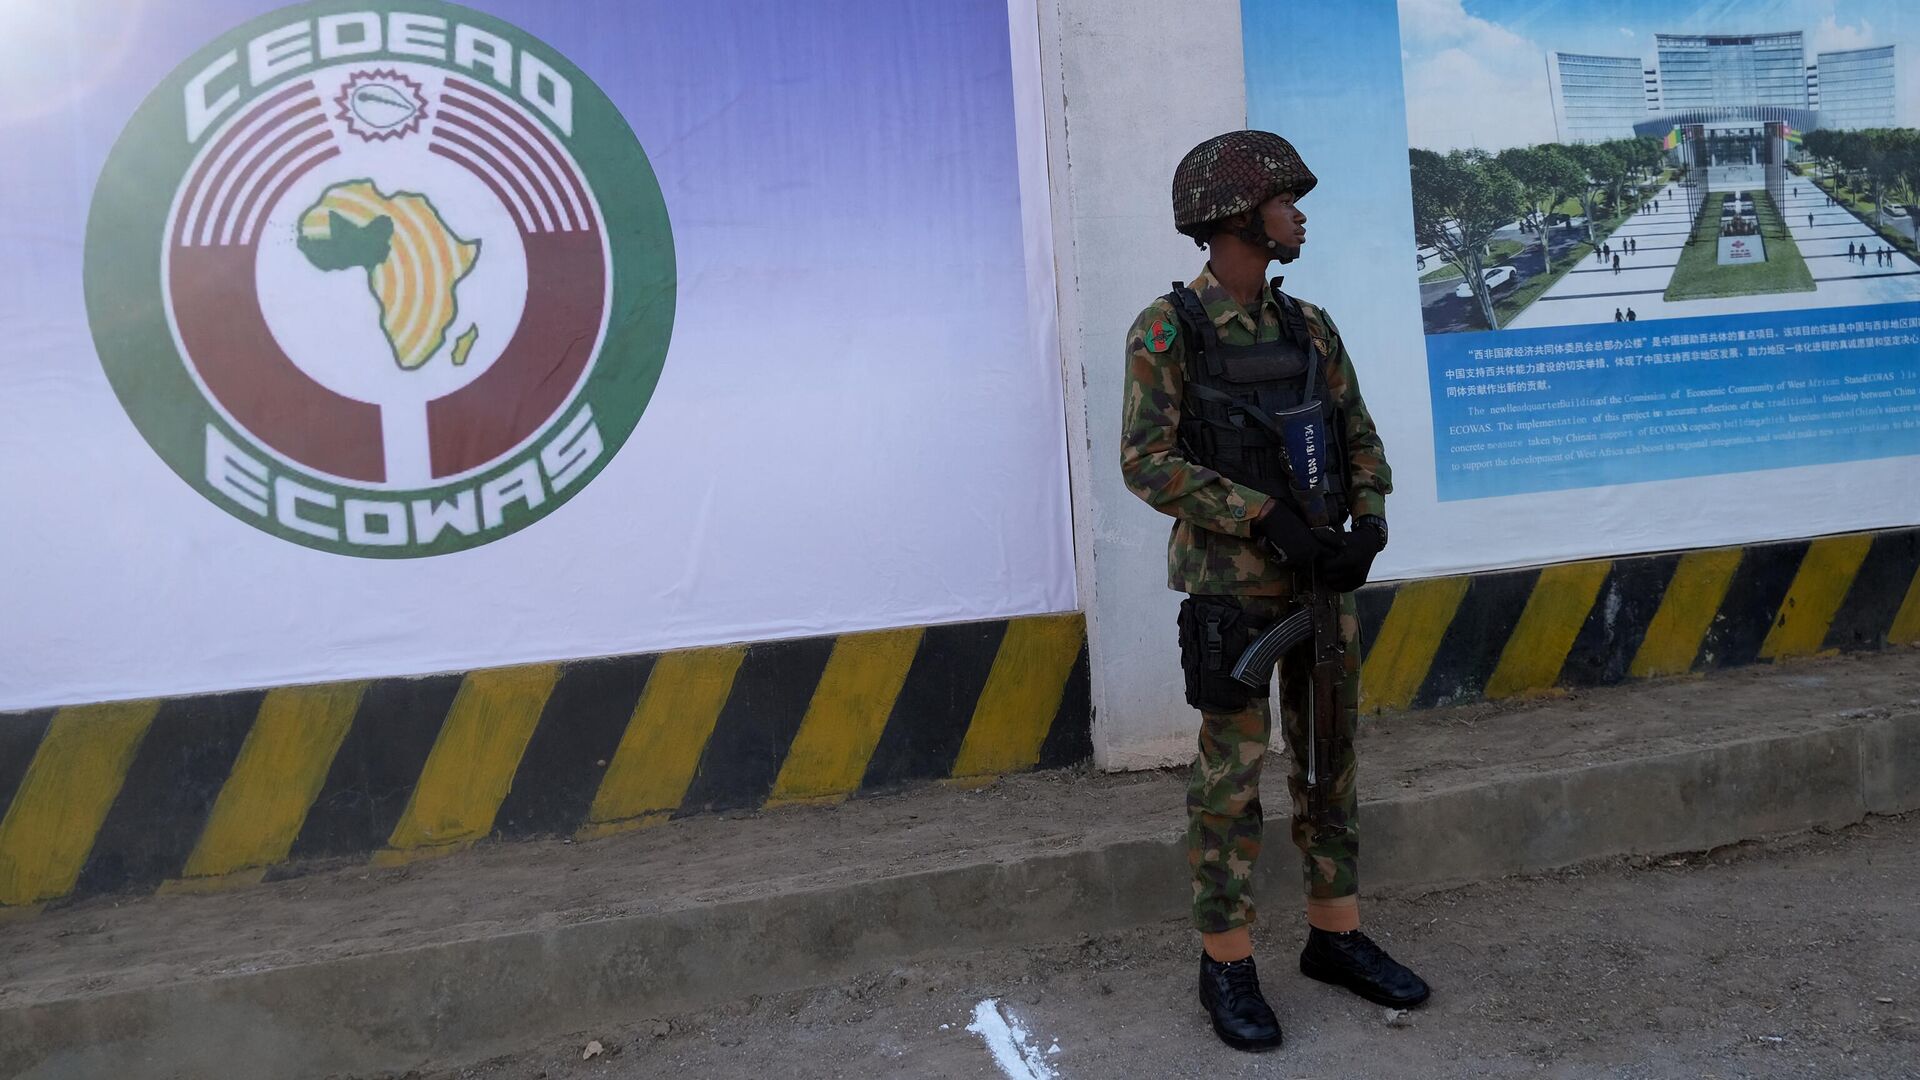 A Nigerian soldier stands outside the new construction site of the headquartes of the Economic Community of West African States (ECOWAS) during the ground-breaking ceremony at the 62nd Ordinary Session of ECOWAS Authority of Heads of State and Government in Abuja on December 4, 2022. - Sputnik International, 1920, 06.12.2022